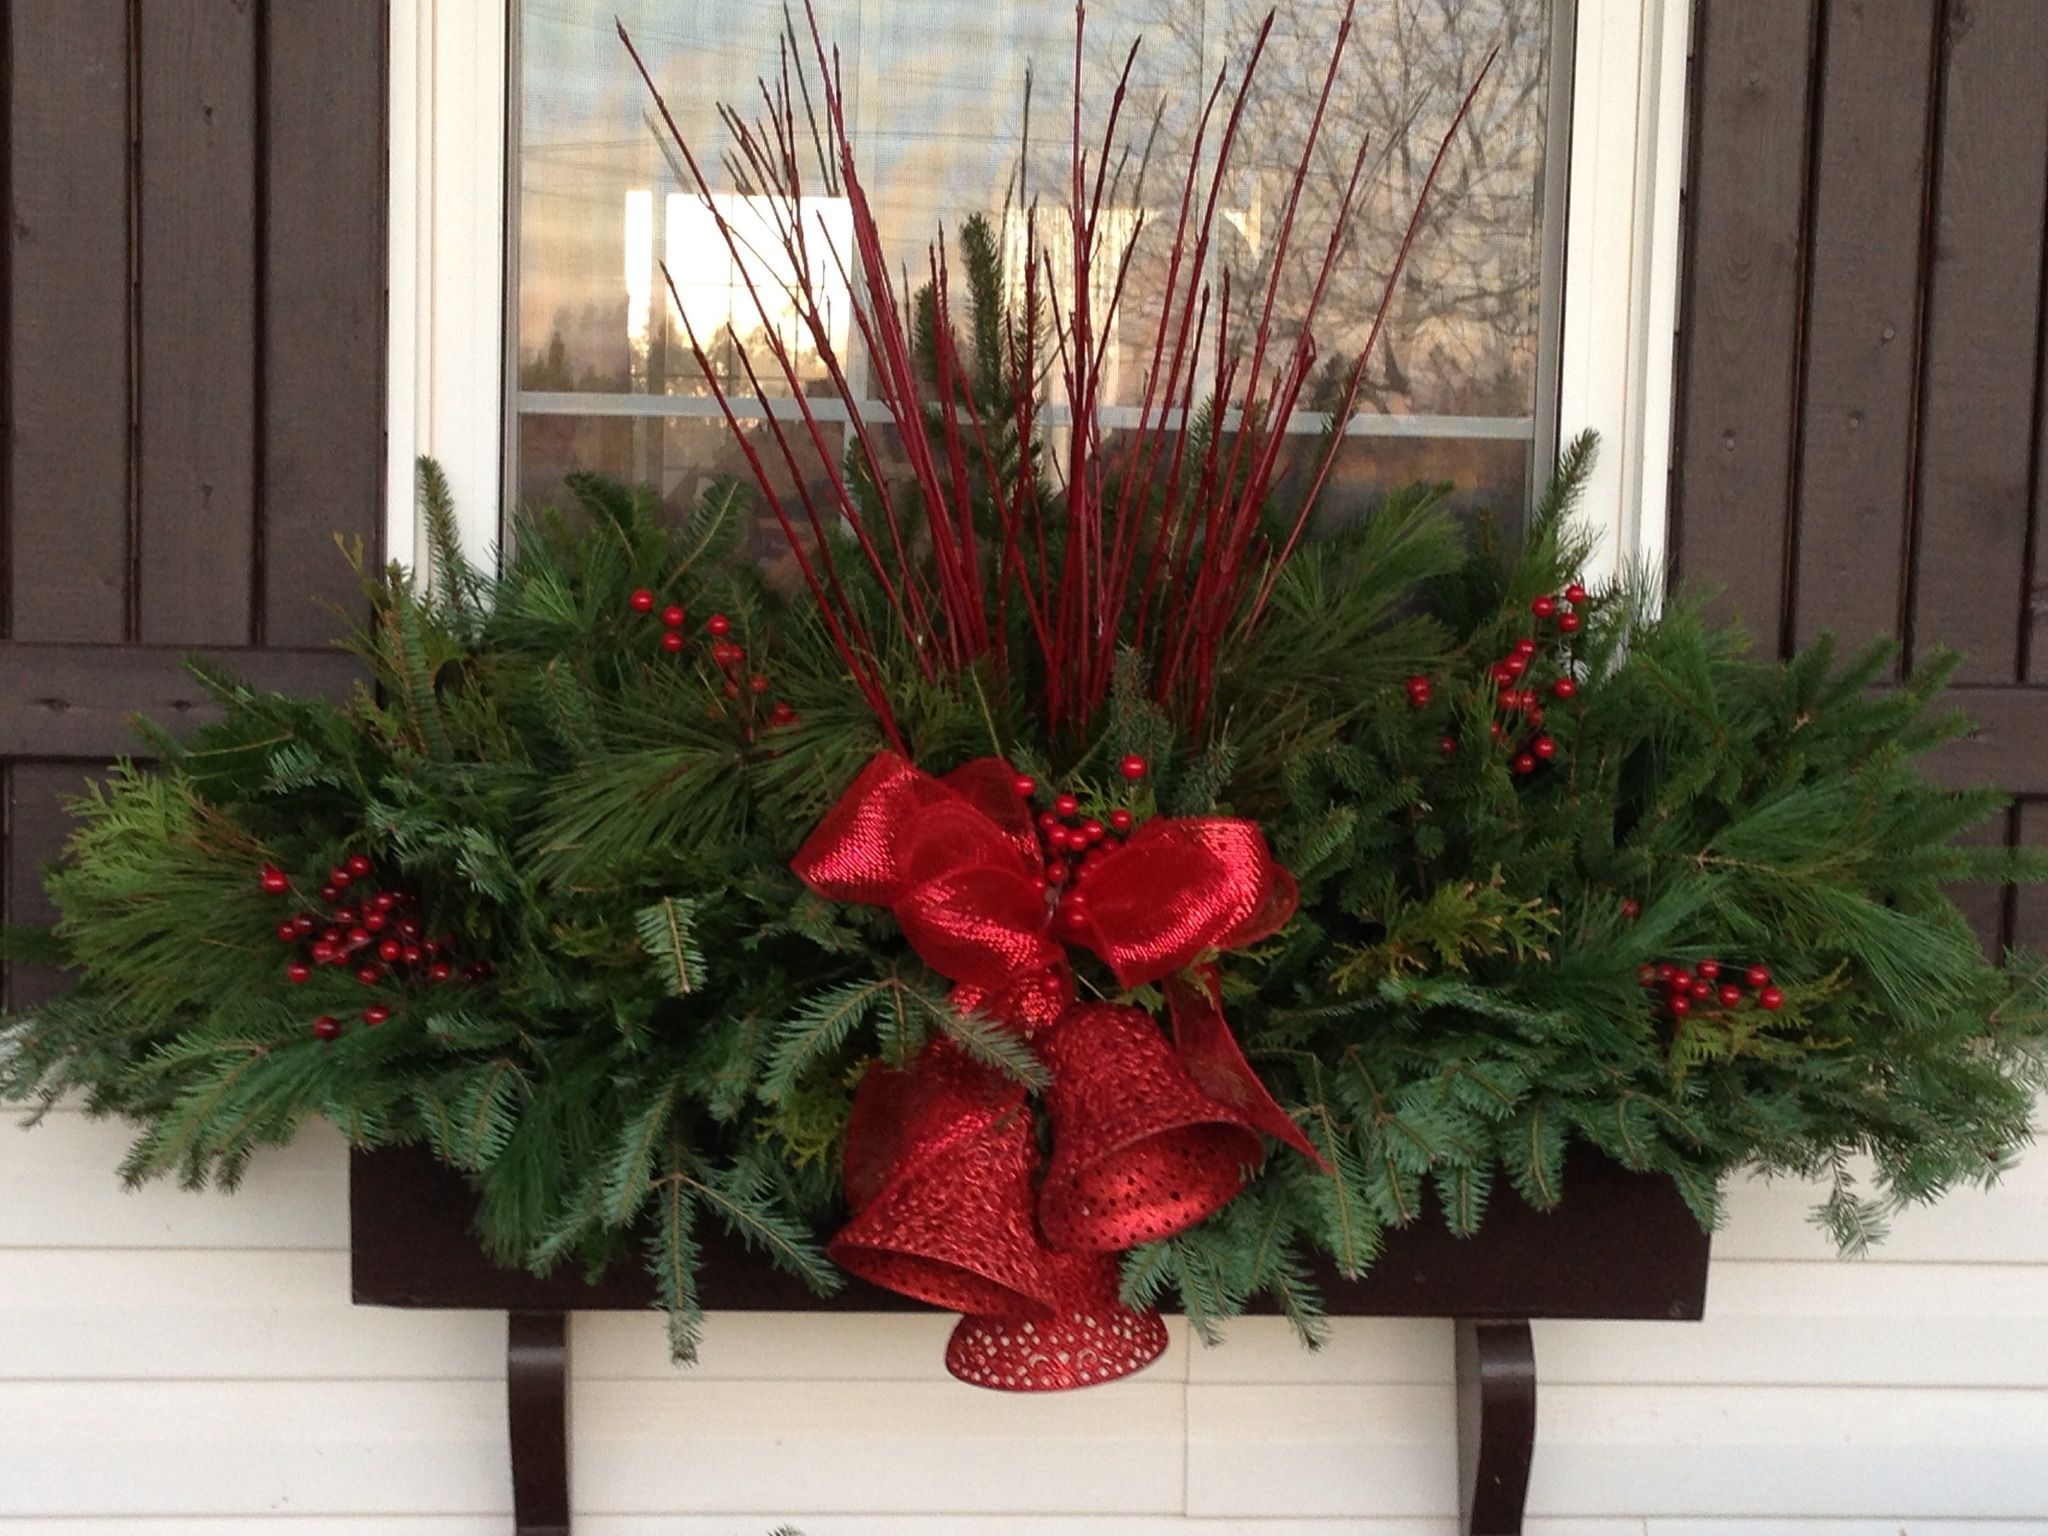 100 Best Outdoor Christmas Planters Ideas | Christmas